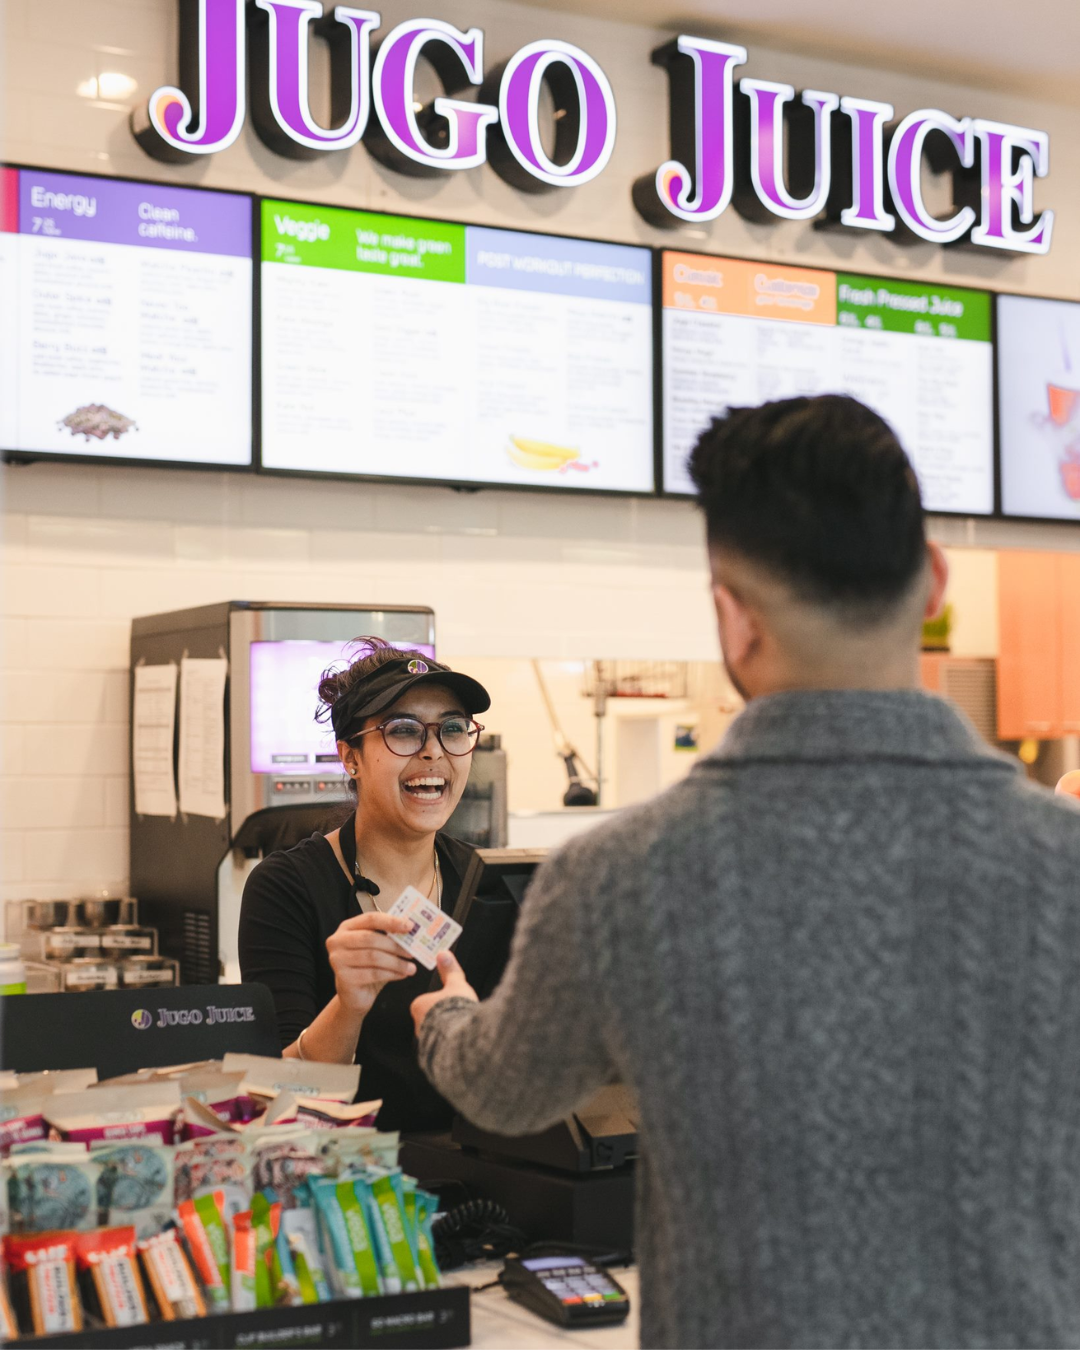 A person smiling at a person at a juice store.